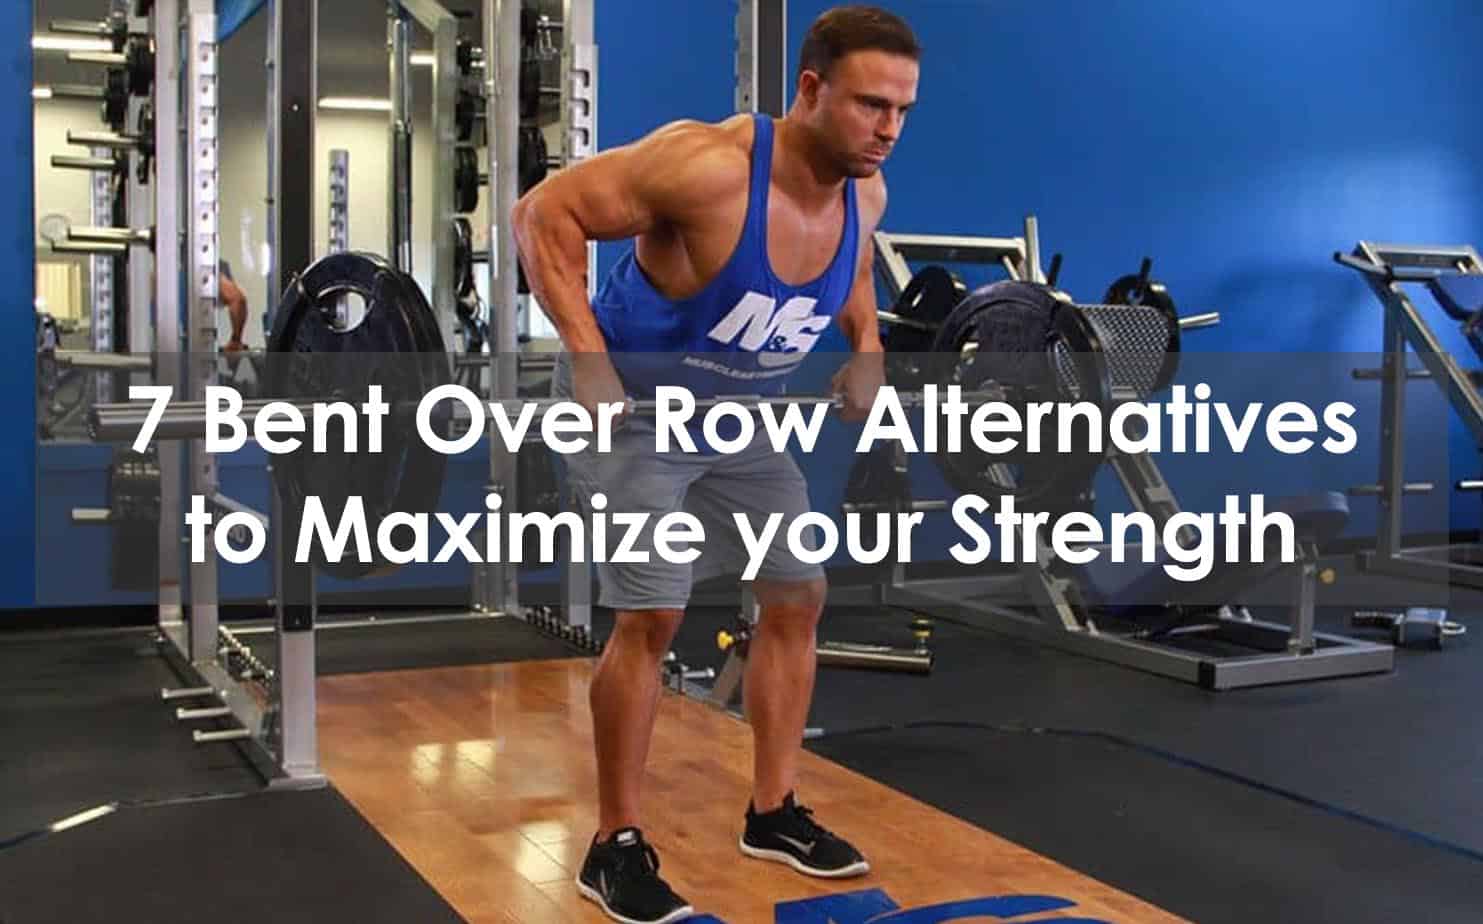 Microprocessor Funds George Stevenson 7 Bent Over Row Alternatives To Maximize Your Strength